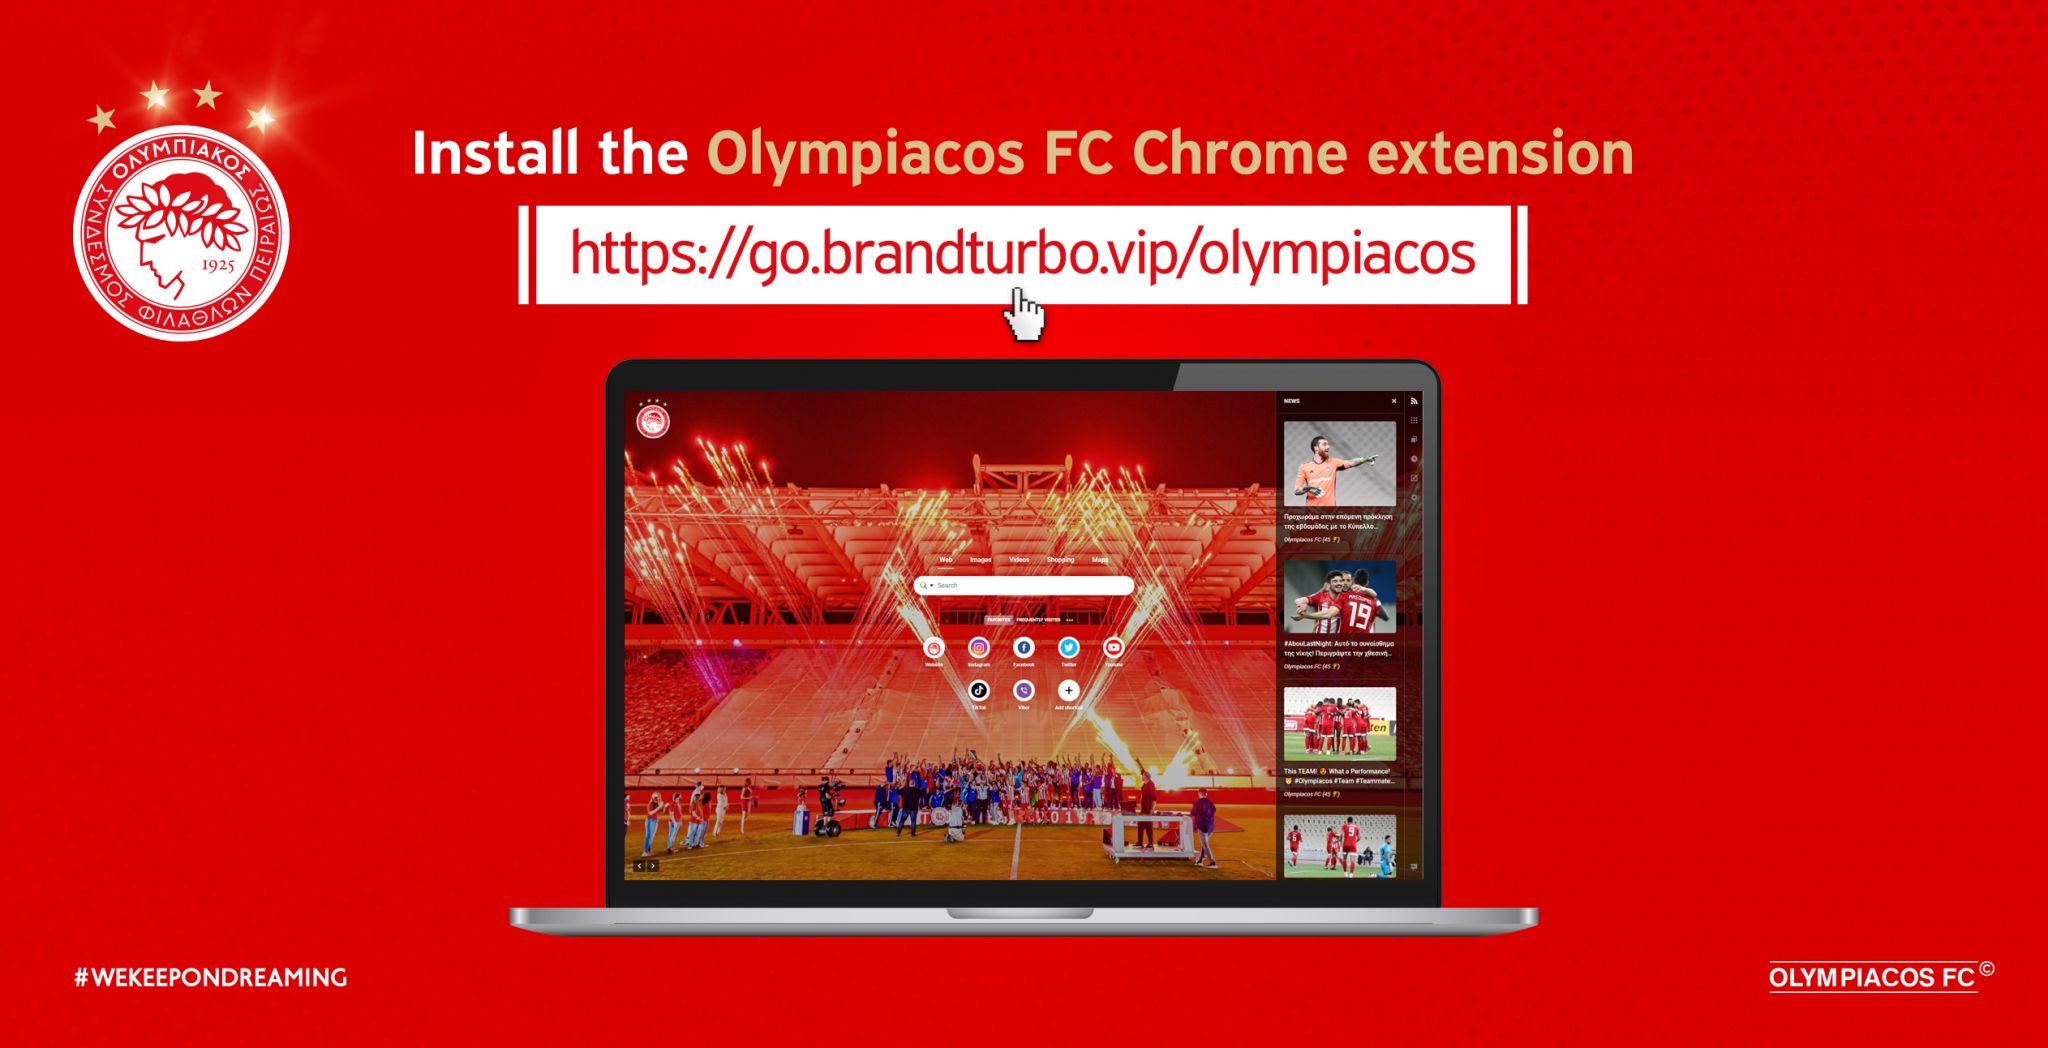 Download the Olympiacos FC Chrome extension